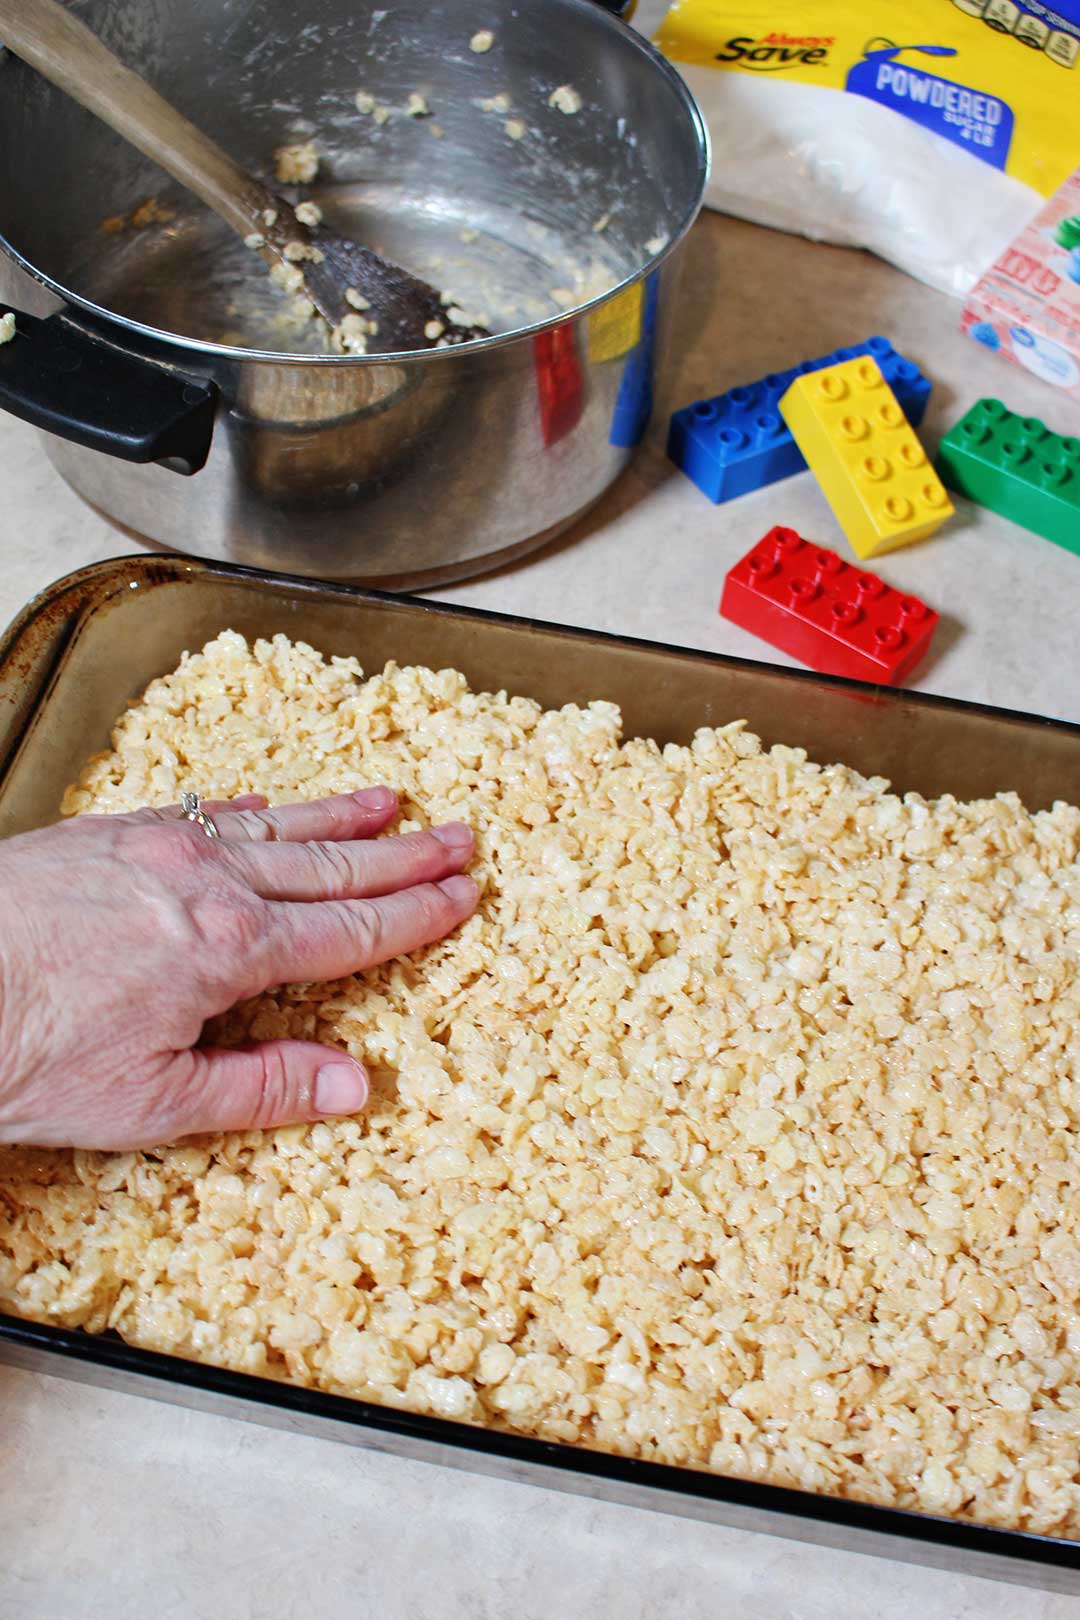 Pressing down a rice crispy mixture into a pan.